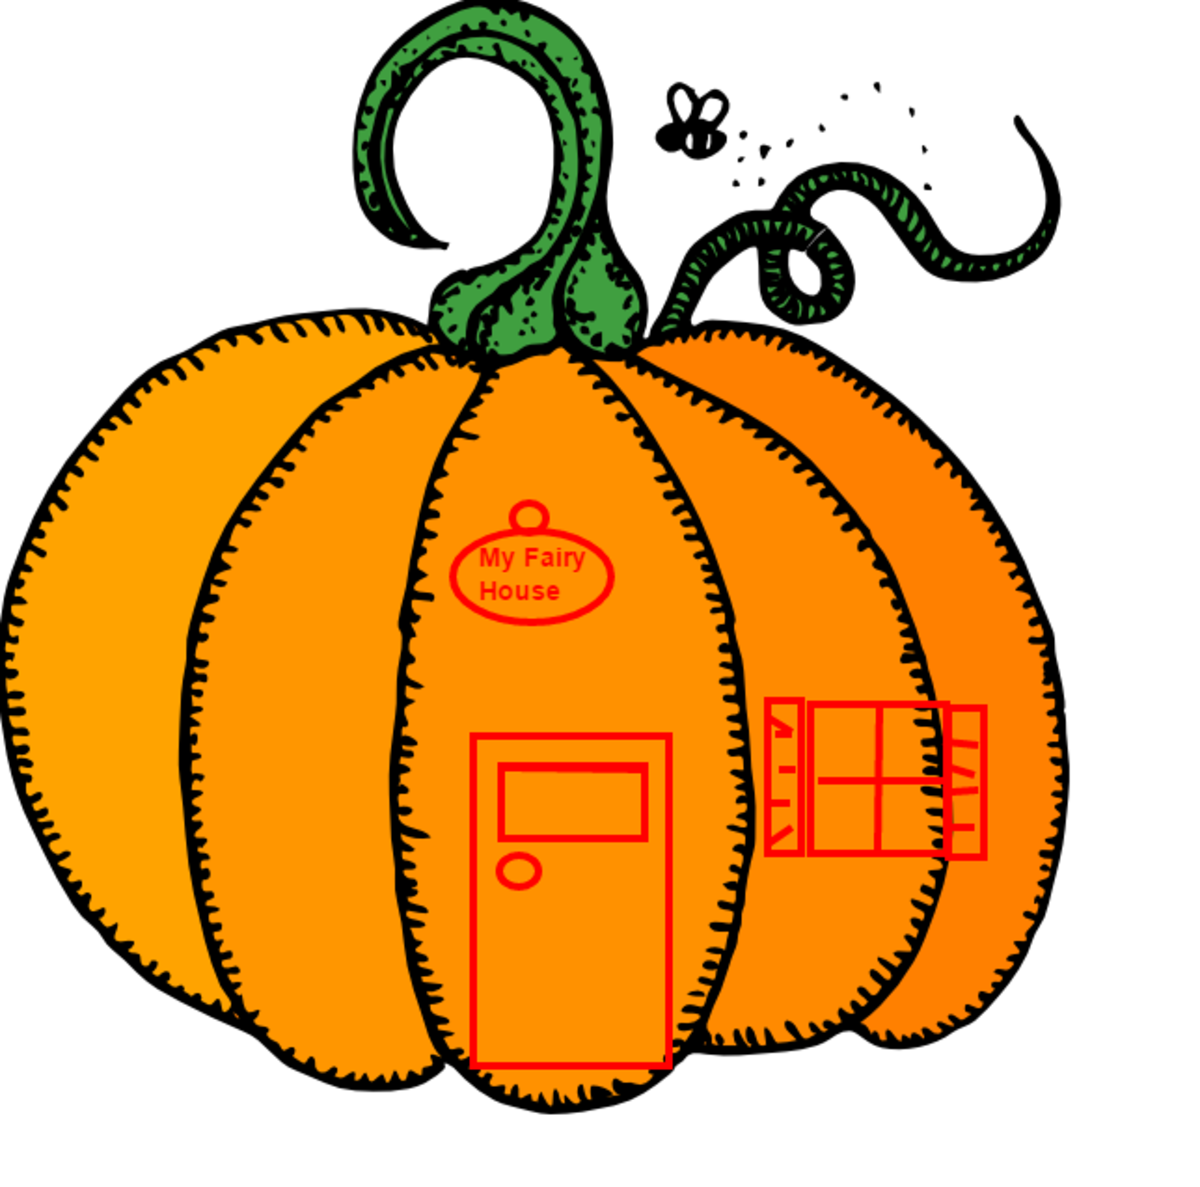 You can paint a door and window on a small pumpkin to put into your Halloween fairy garden. Add a ghost peering out the window or attach a small flying witch on a broomstick. 